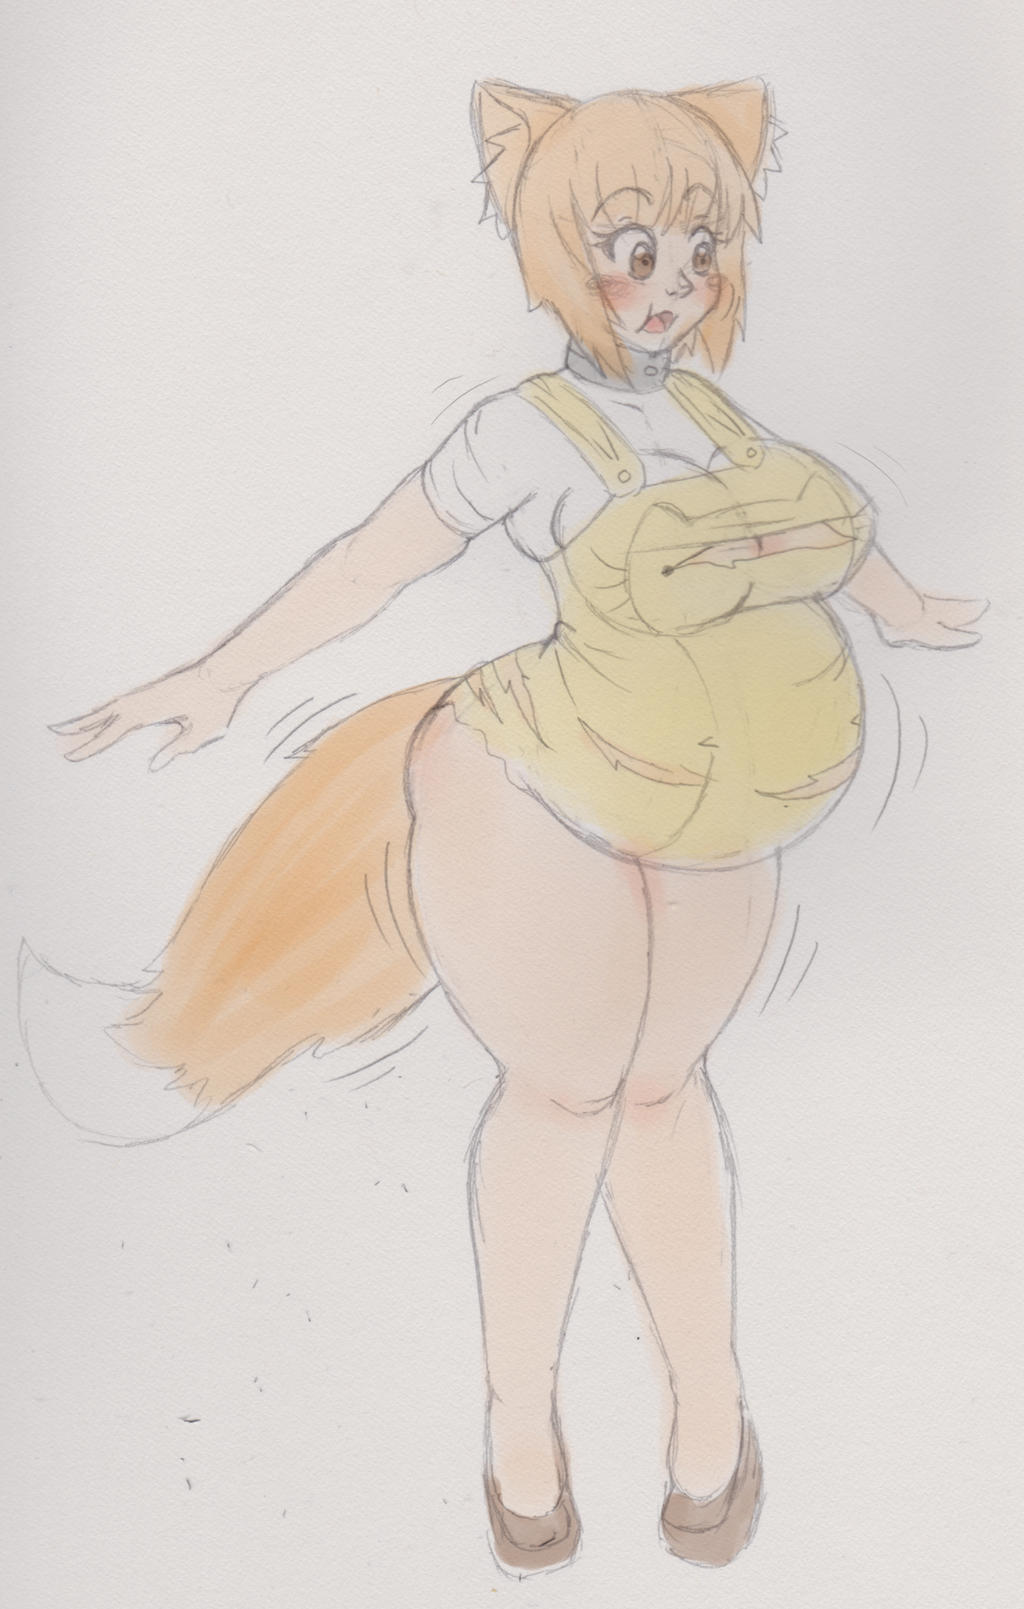 ist traditional artist         aww she"s cute, and that belly